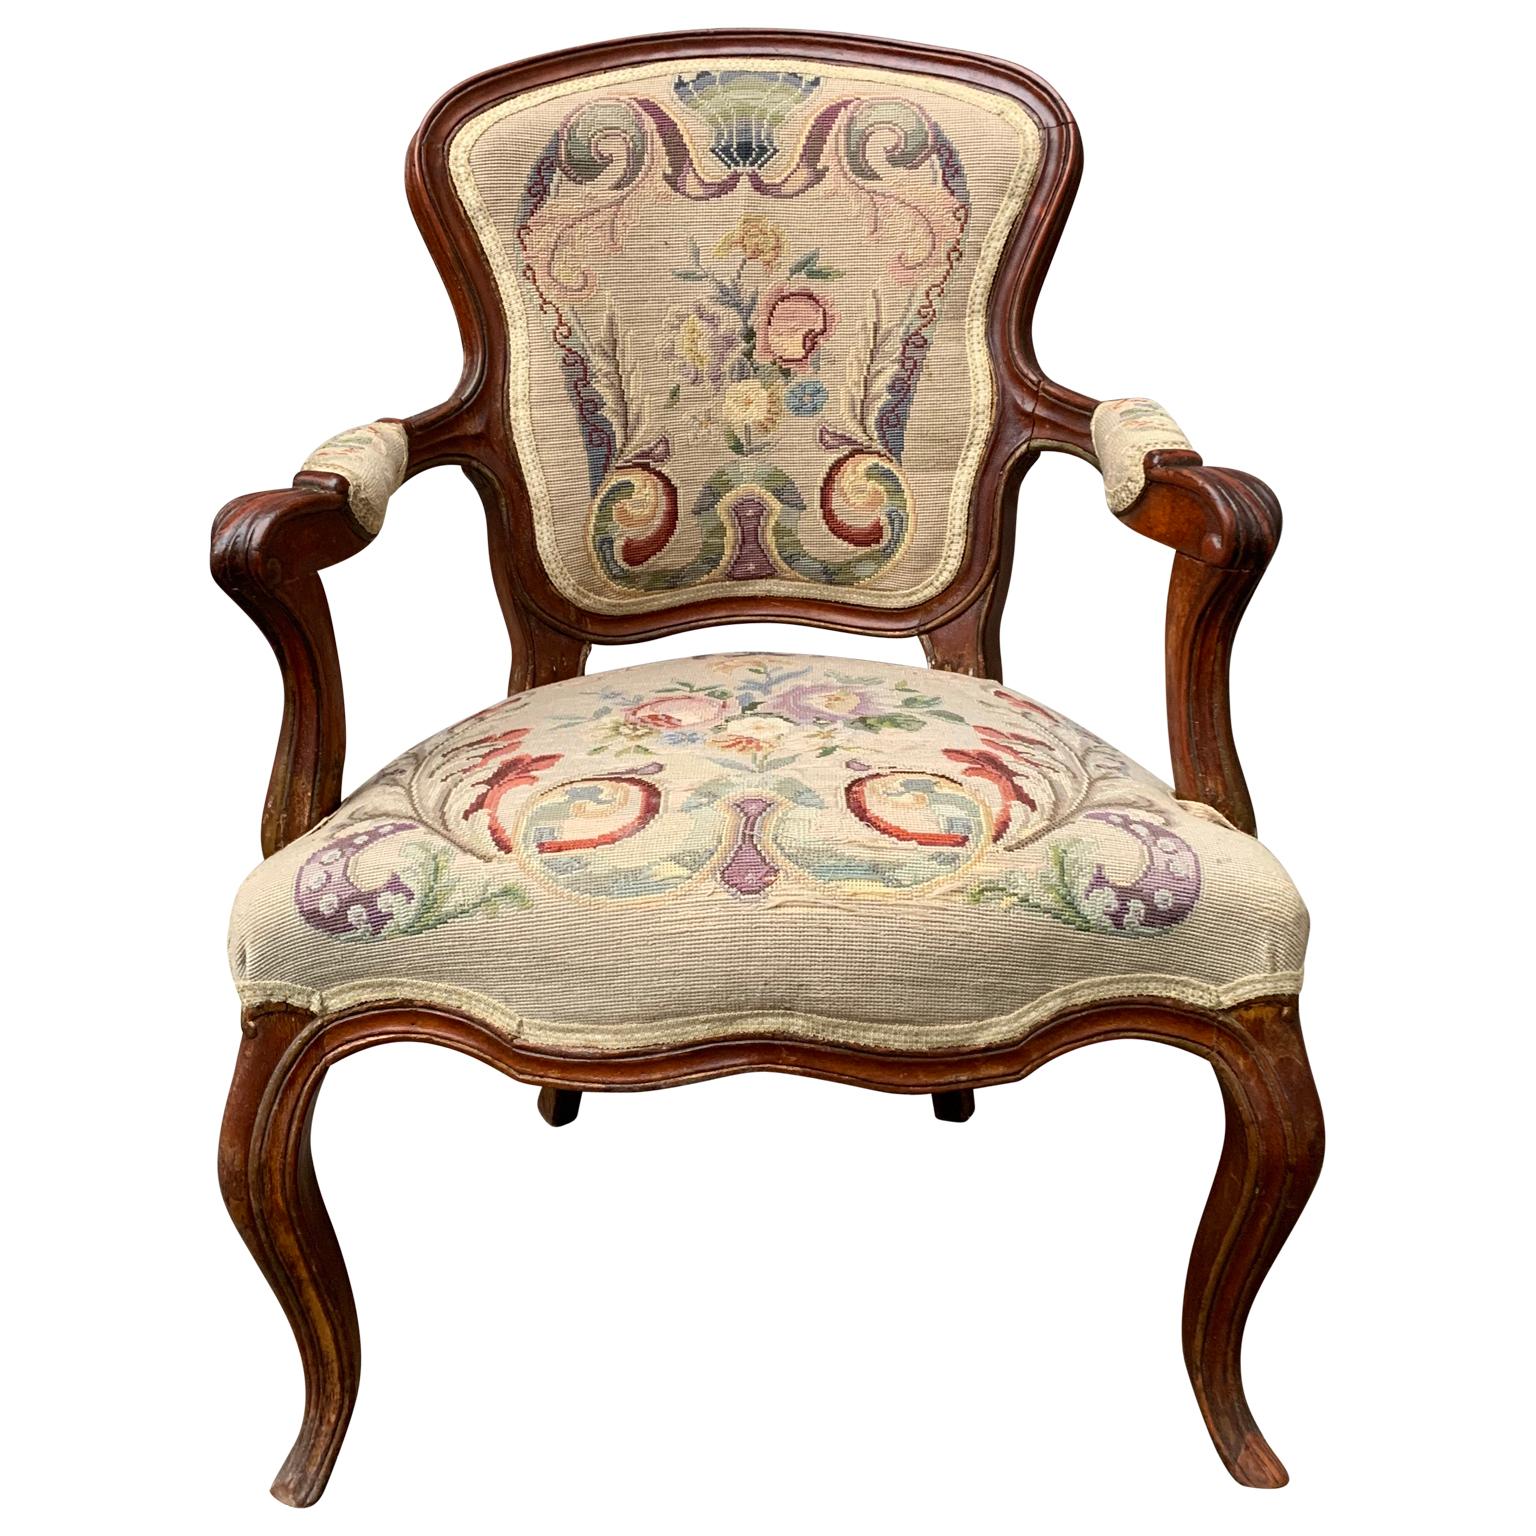 An 18th century French rococo armchair the darker aged patina. Hand carved open arm fauteil with hand woven fabric.

Please note that this armchair is located in Halmstad Sweden.
EUR 100 delivery to most areas of London UK, The Netherlands, Belgium,